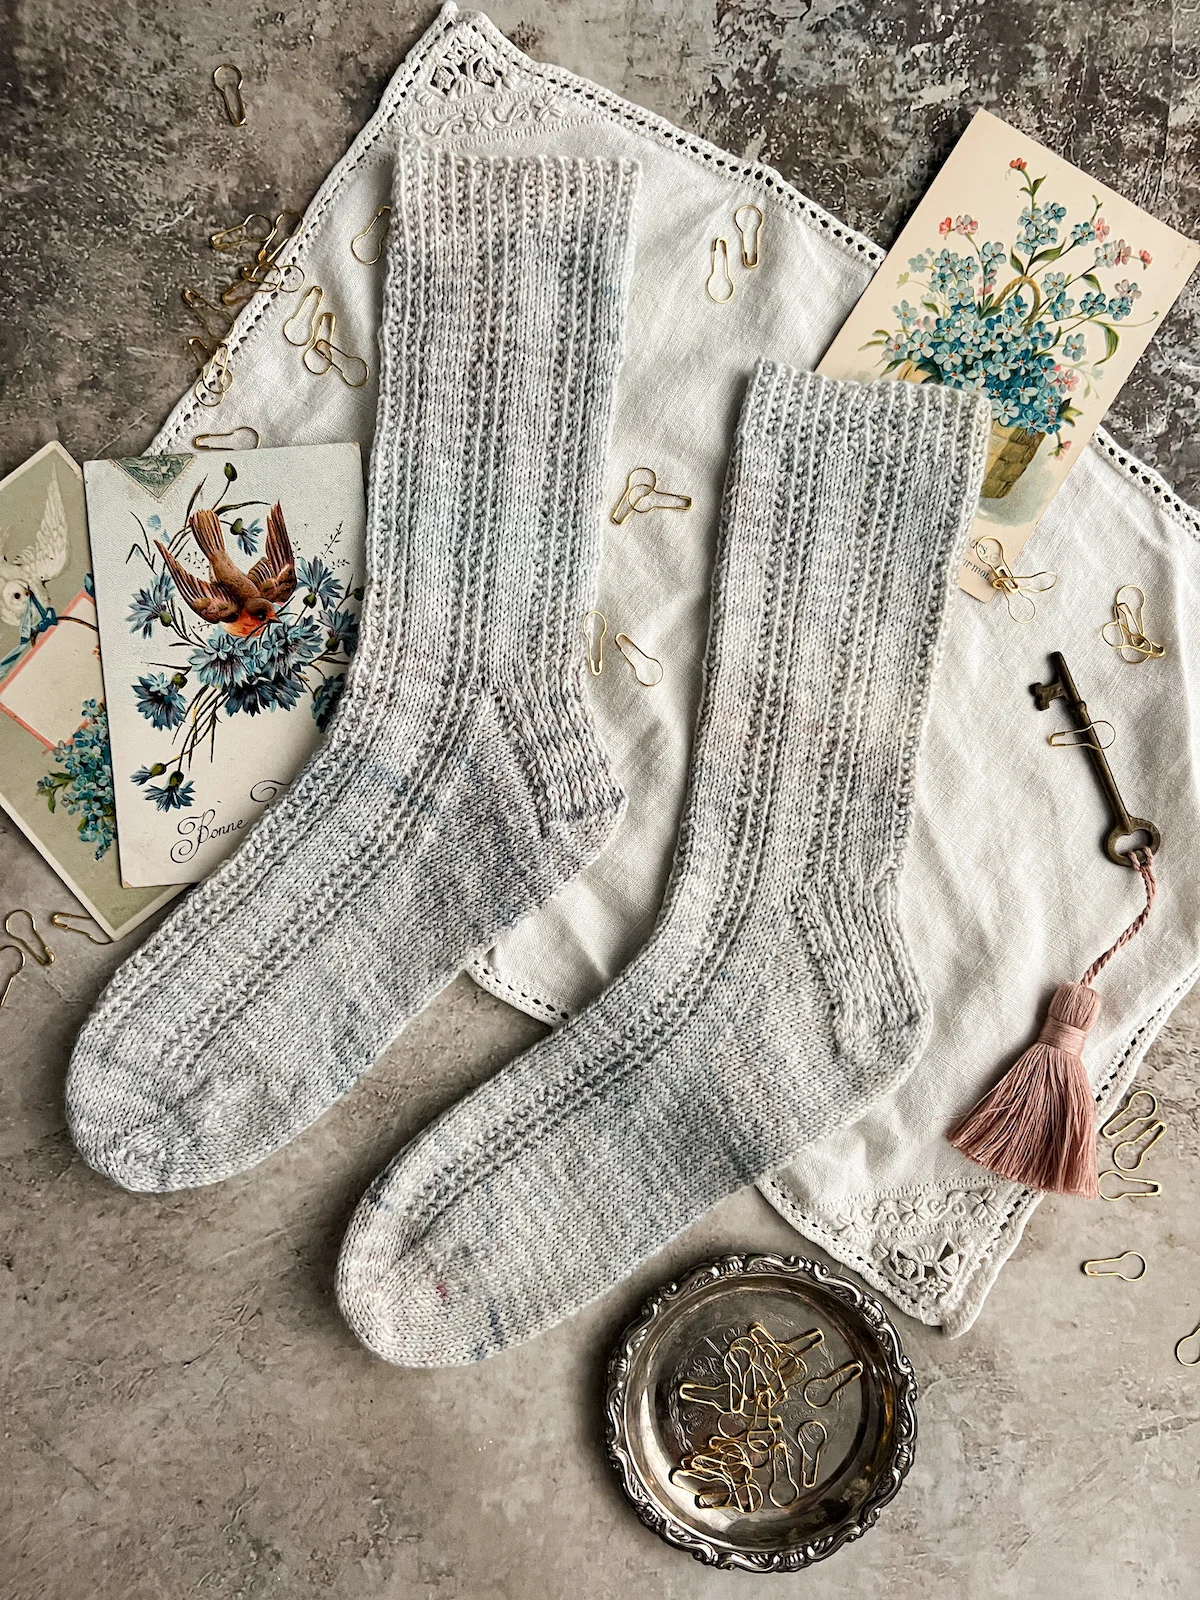 A top-down photo of a pair of light blue socks laid flat on an antique lace-trimmed placemat. The socks have columns of purls running up and down the legs and are pointing to the left. They are surrounded by antique postcards with blue flowers on them, a brass key with a pale pink tassel, and a silver tray full of brass bulb pins.